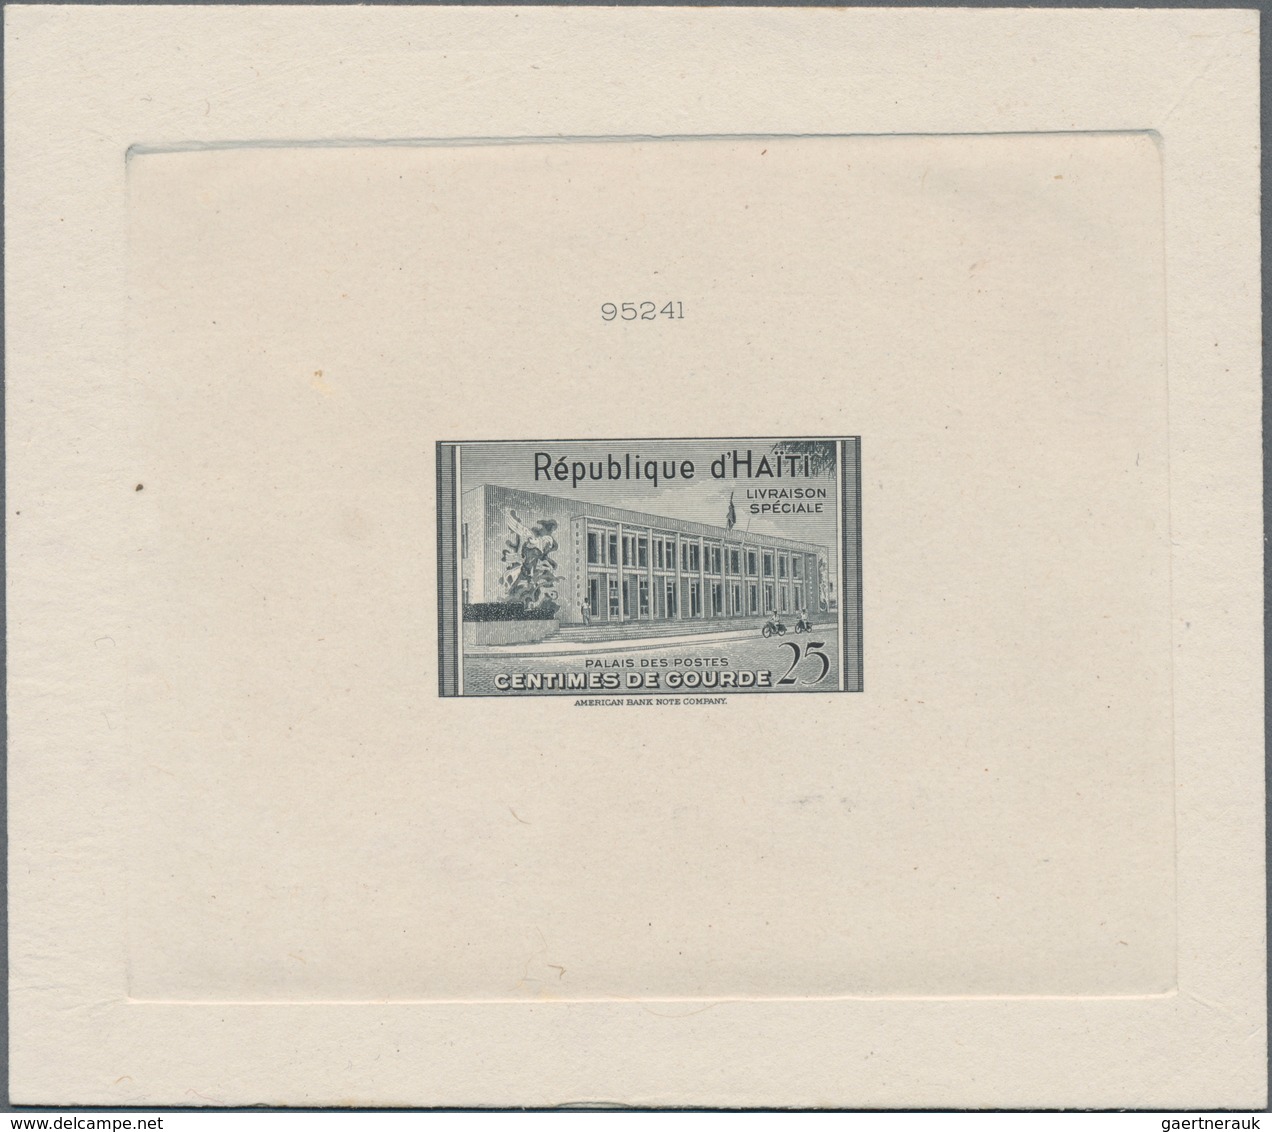 Haiti: 1953. Lot Of 3 Different Epreuves For The 25c Express Stamp Showing Main Post Office. - Haiti